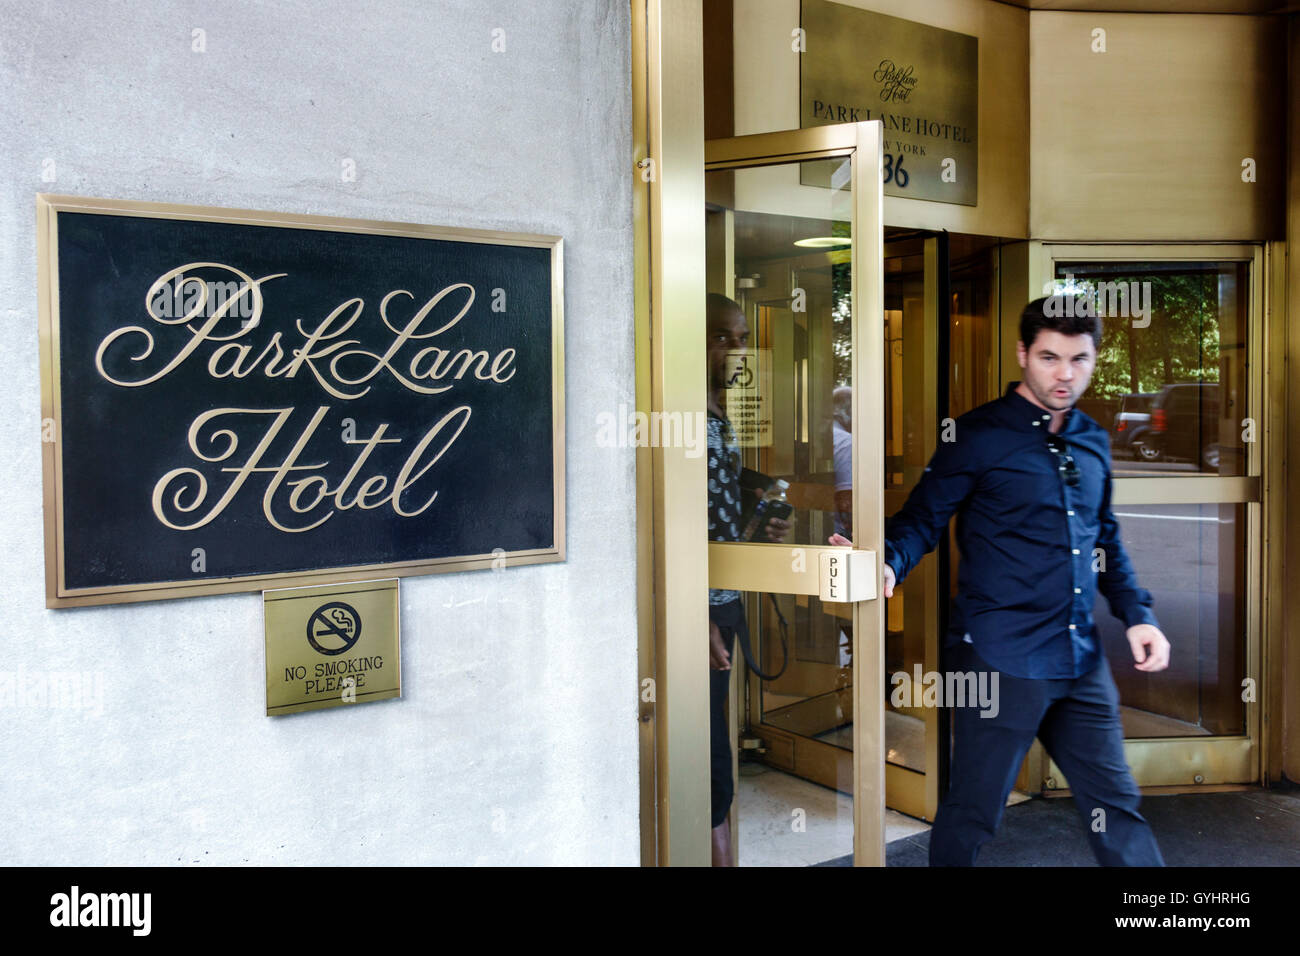 New York City,NY NYC Manhattan,Central Park South,Park Lane Hotel,hotel,lodging,front,entrance,door,adult,adults,man men male,exiting,sign,no smoking, Stock Photo